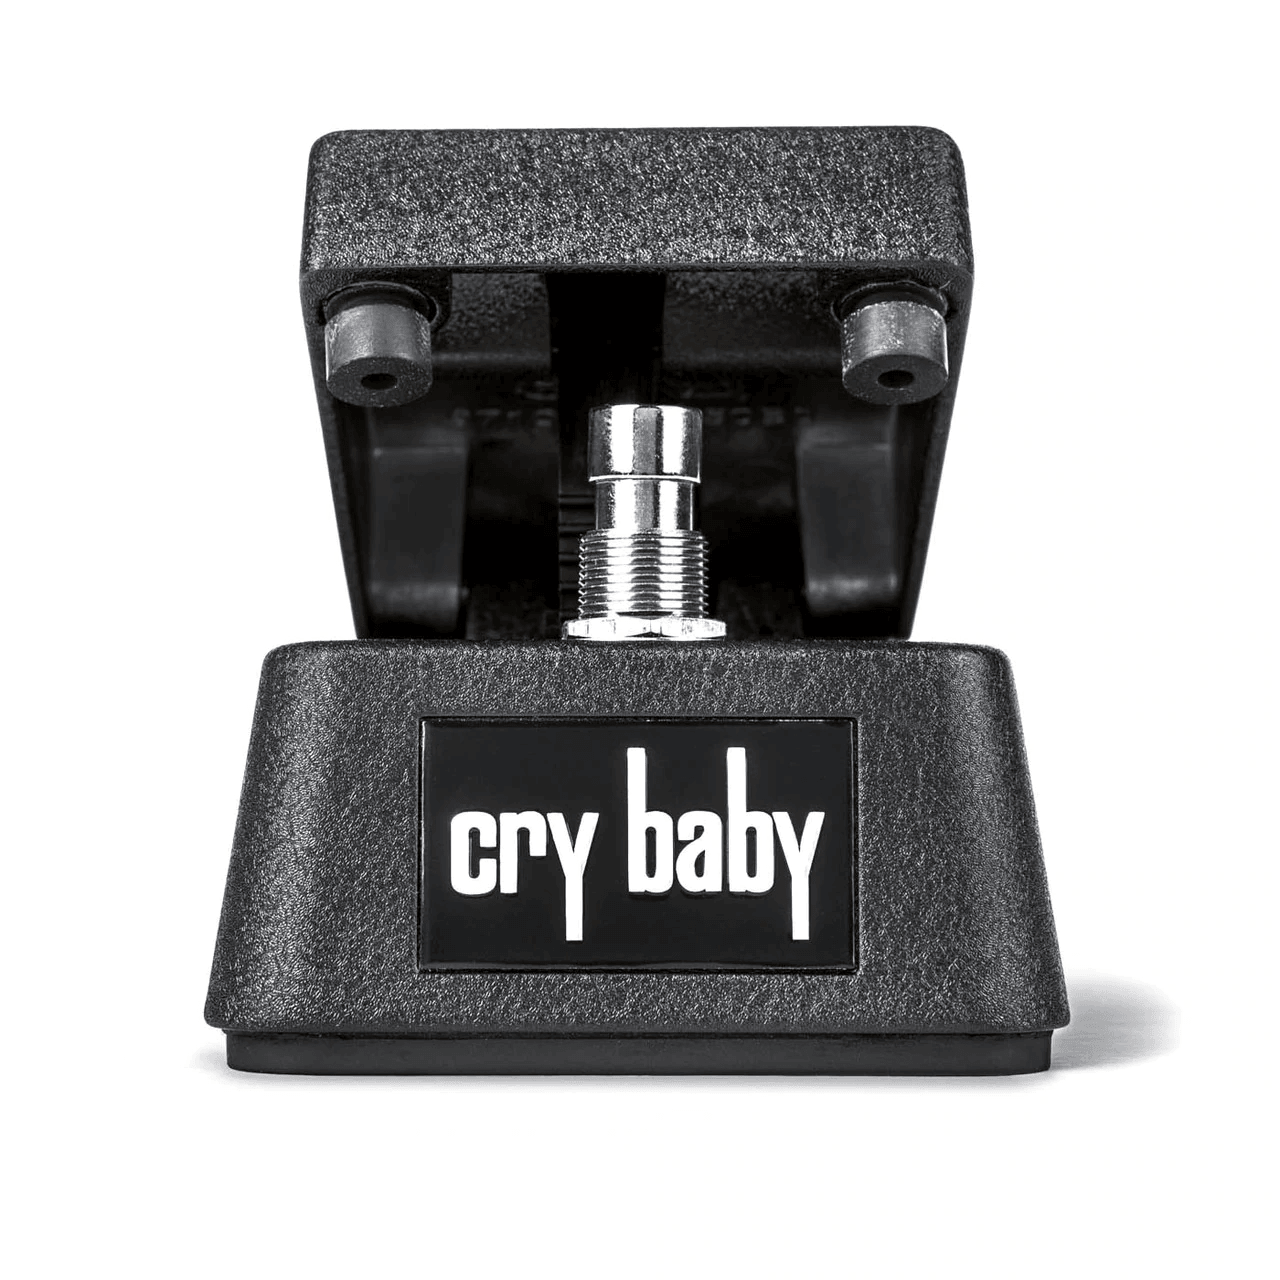 Dunlop Mini Crybaby Wah - Guitar - Effects Pedals by Dunlop at Muso's Stuff